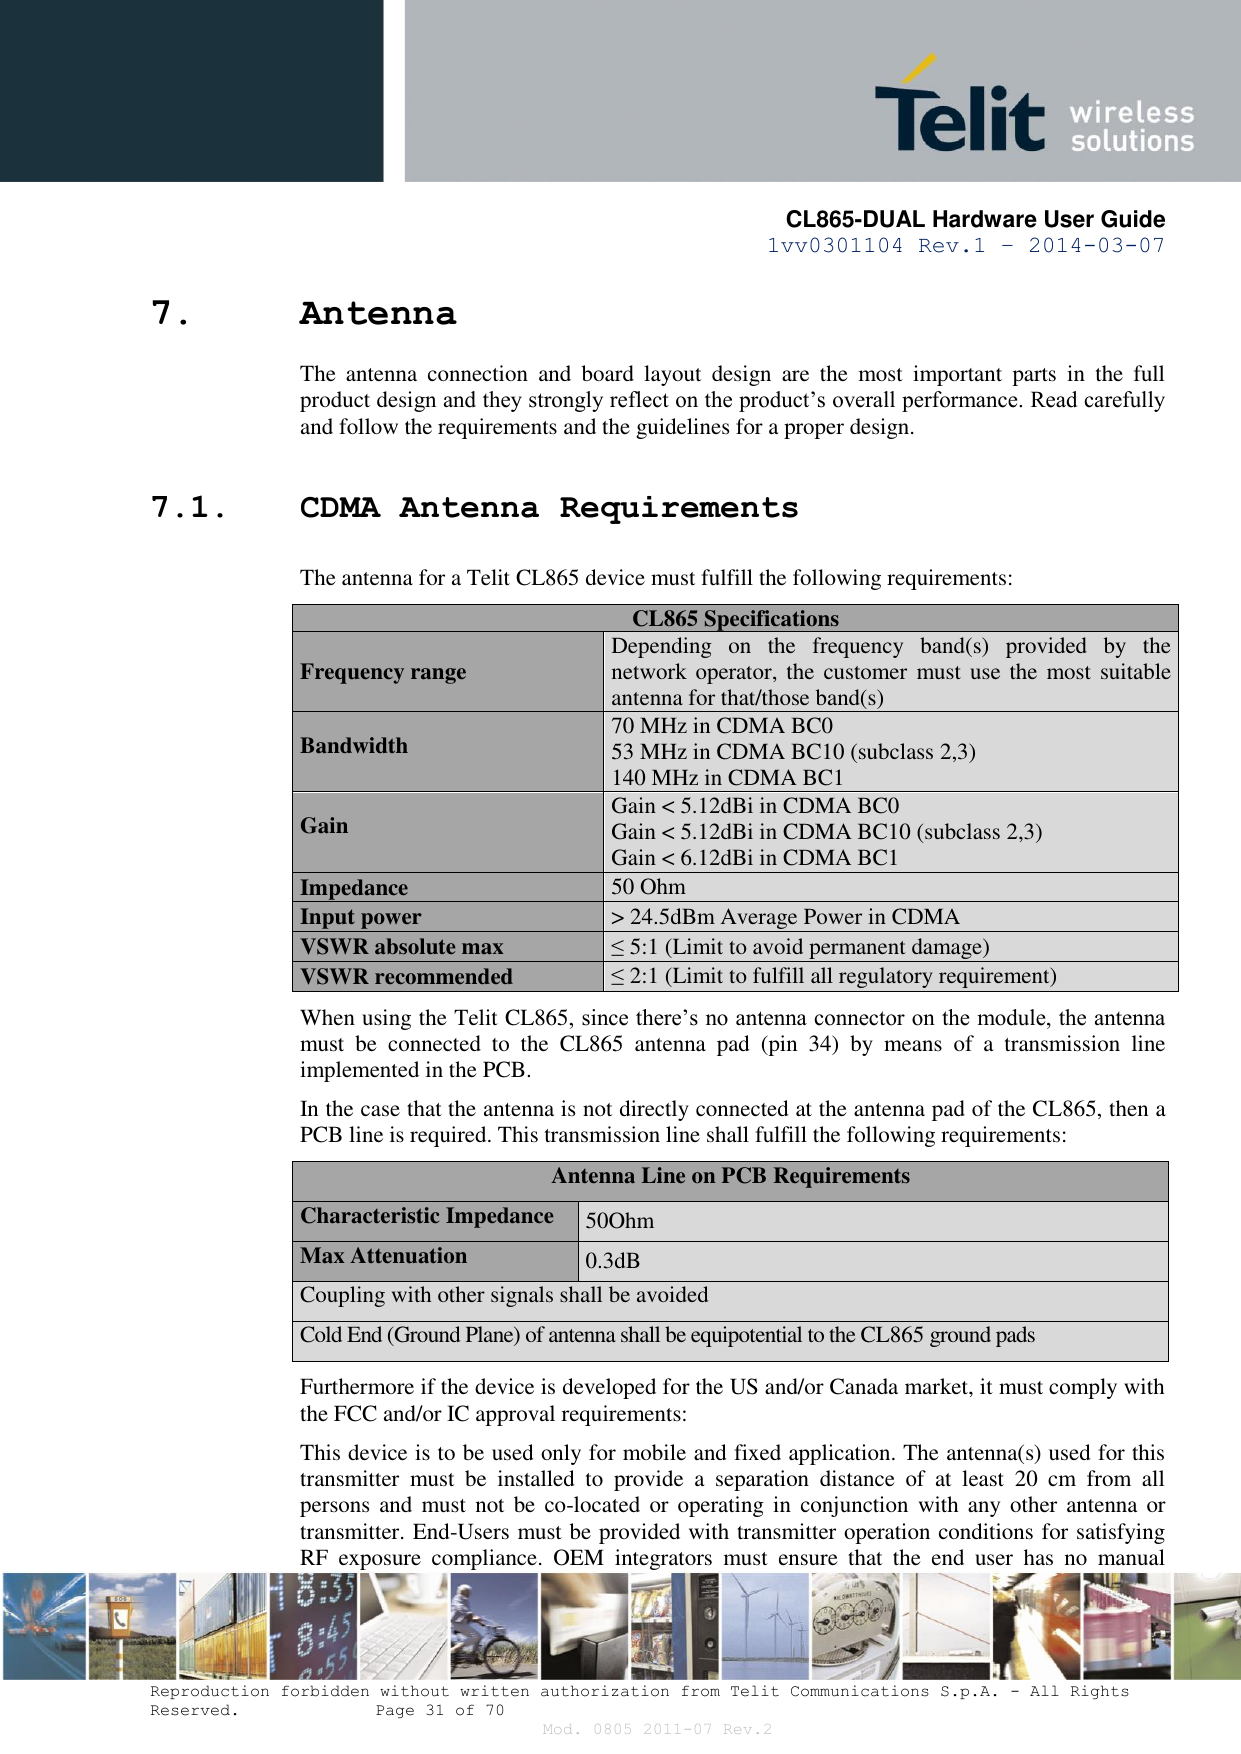       CL865-DUAL Hardware User Guide 1vv0301104 Rev.1 – 2014-03-07  Reproduction forbidden without written authorization from Telit Communications S.p.A. - All Rights Reserved.    Page 31 of 70 Mod. 0805 2011-07 Rev.2 7. Antenna The  antenna  connection  and  board  layout  design  are  the  most  important  parts  in  the  full product design and they strongly reflect on the product’s overall performance. Read carefully and follow the requirements and the guidelines for a proper design. 7.1. CDMA Antenna Requirements The antenna for a Telit CL865 device must fulfill the following requirements: CL865 Specifications Frequency range Depending  on  the  frequency  band(s)  provided  by  the network operator, the  customer must use the  most suitable antenna for that/those band(s) Bandwidth 70 MHz in CDMA BC0 53 MHz in CDMA BC10 (subclass 2,3) 140 MHz in CDMA BC1 Gain Gain &lt; 5.12dBi in CDMA BC0 Gain &lt; 5.12dBi in CDMA BC10 (subclass 2,3) Gain &lt; 6.12dBi in CDMA BC1 Impedance 50 Ohm Input power &gt; 24.5dBm Average Power in CDMA VSWR absolute max ≤ 5:1 (Limit to avoid permanent damage) VSWR recommended ≤ 2:1 (Limit to fulfill all regulatory requirement) When using the Telit CL865, since there’s no antenna connector on the module, the antenna must  be  connected  to  the  CL865  antenna  pad  (pin  34)  by  means  of  a  transmission  line implemented in the PCB. In the case that the antenna is not directly connected at the antenna pad of the CL865, then a PCB line is required. This transmission line shall fulfill the following requirements: Antenna Line on PCB Requirements Characteristic Impedance 50Ohm Max Attenuation 0.3dB Coupling with other signals shall be avoided Cold End (Ground Plane) of antenna shall be equipotential to the CL865 ground pads Furthermore if the device is developed for the US and/or Canada market, it must comply with the FCC and/or IC approval requirements: This device is to be used only for mobile and fixed application. The antenna(s) used for this transmitter  must  be  installed  to  provide  a  separation  distance  of  at  least  20  cm  from  all persons and  must not be  co-located or  operating  in  conjunction  with any  other antenna or transmitter. End-Users must be provided with transmitter operation conditions for satisfying RF  exposure  compliance.  OEM  integrators  must  ensure  that  the  end  user  has  no  manual 